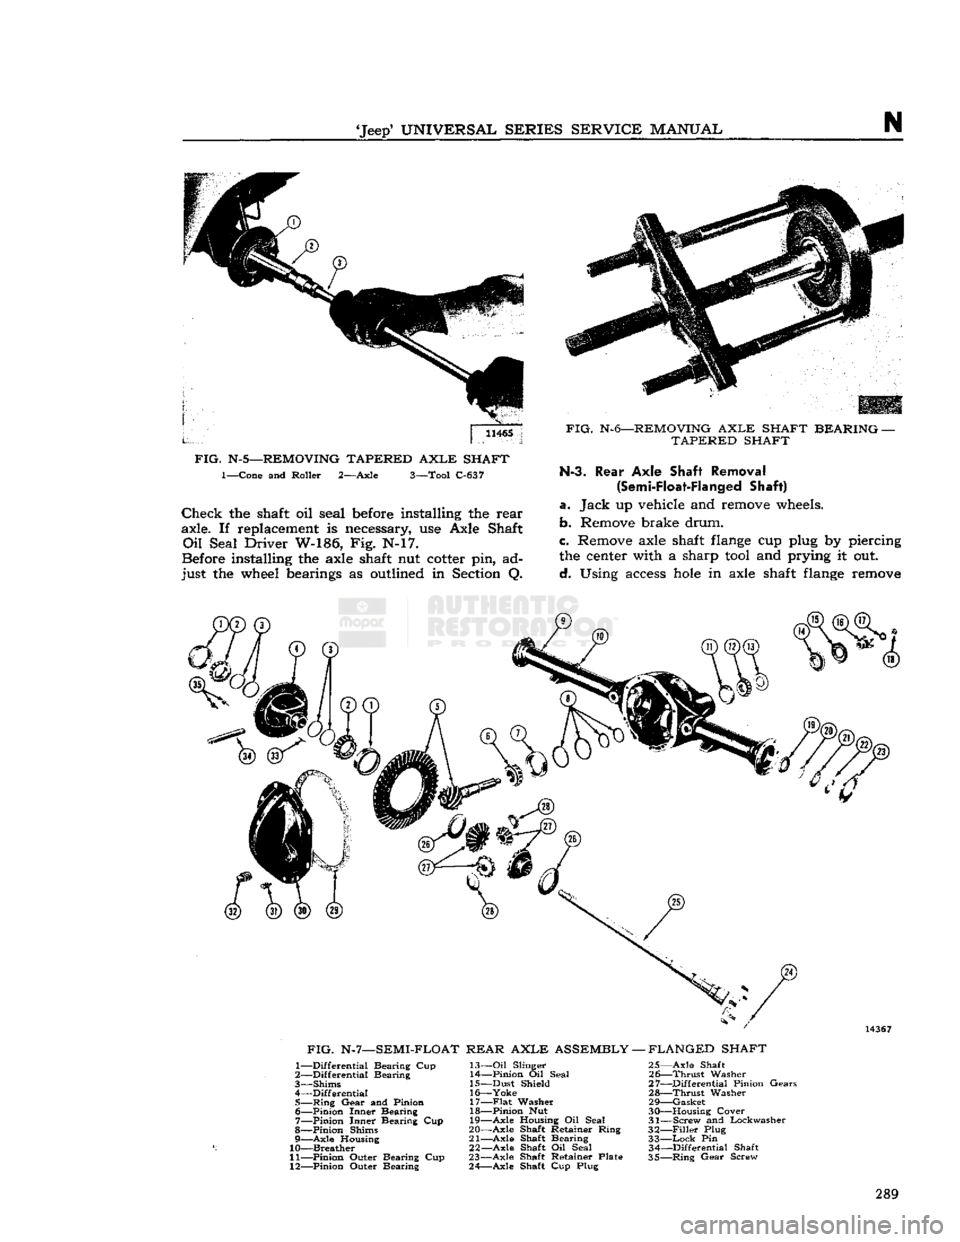 JEEP CJ 1953 User Guide 
Jeep
 UNIVERSAL
 SERIES SERVICE
 MANUAL 

N 

11465 
 FIG.
 N-S—REMOVING
 TAPERED
 AXLE
 SHAFT 
1—Cone and Roller 2—Axle 3—Tool C-637 

Check
 the shaft oil seal
 before
 installing the rea